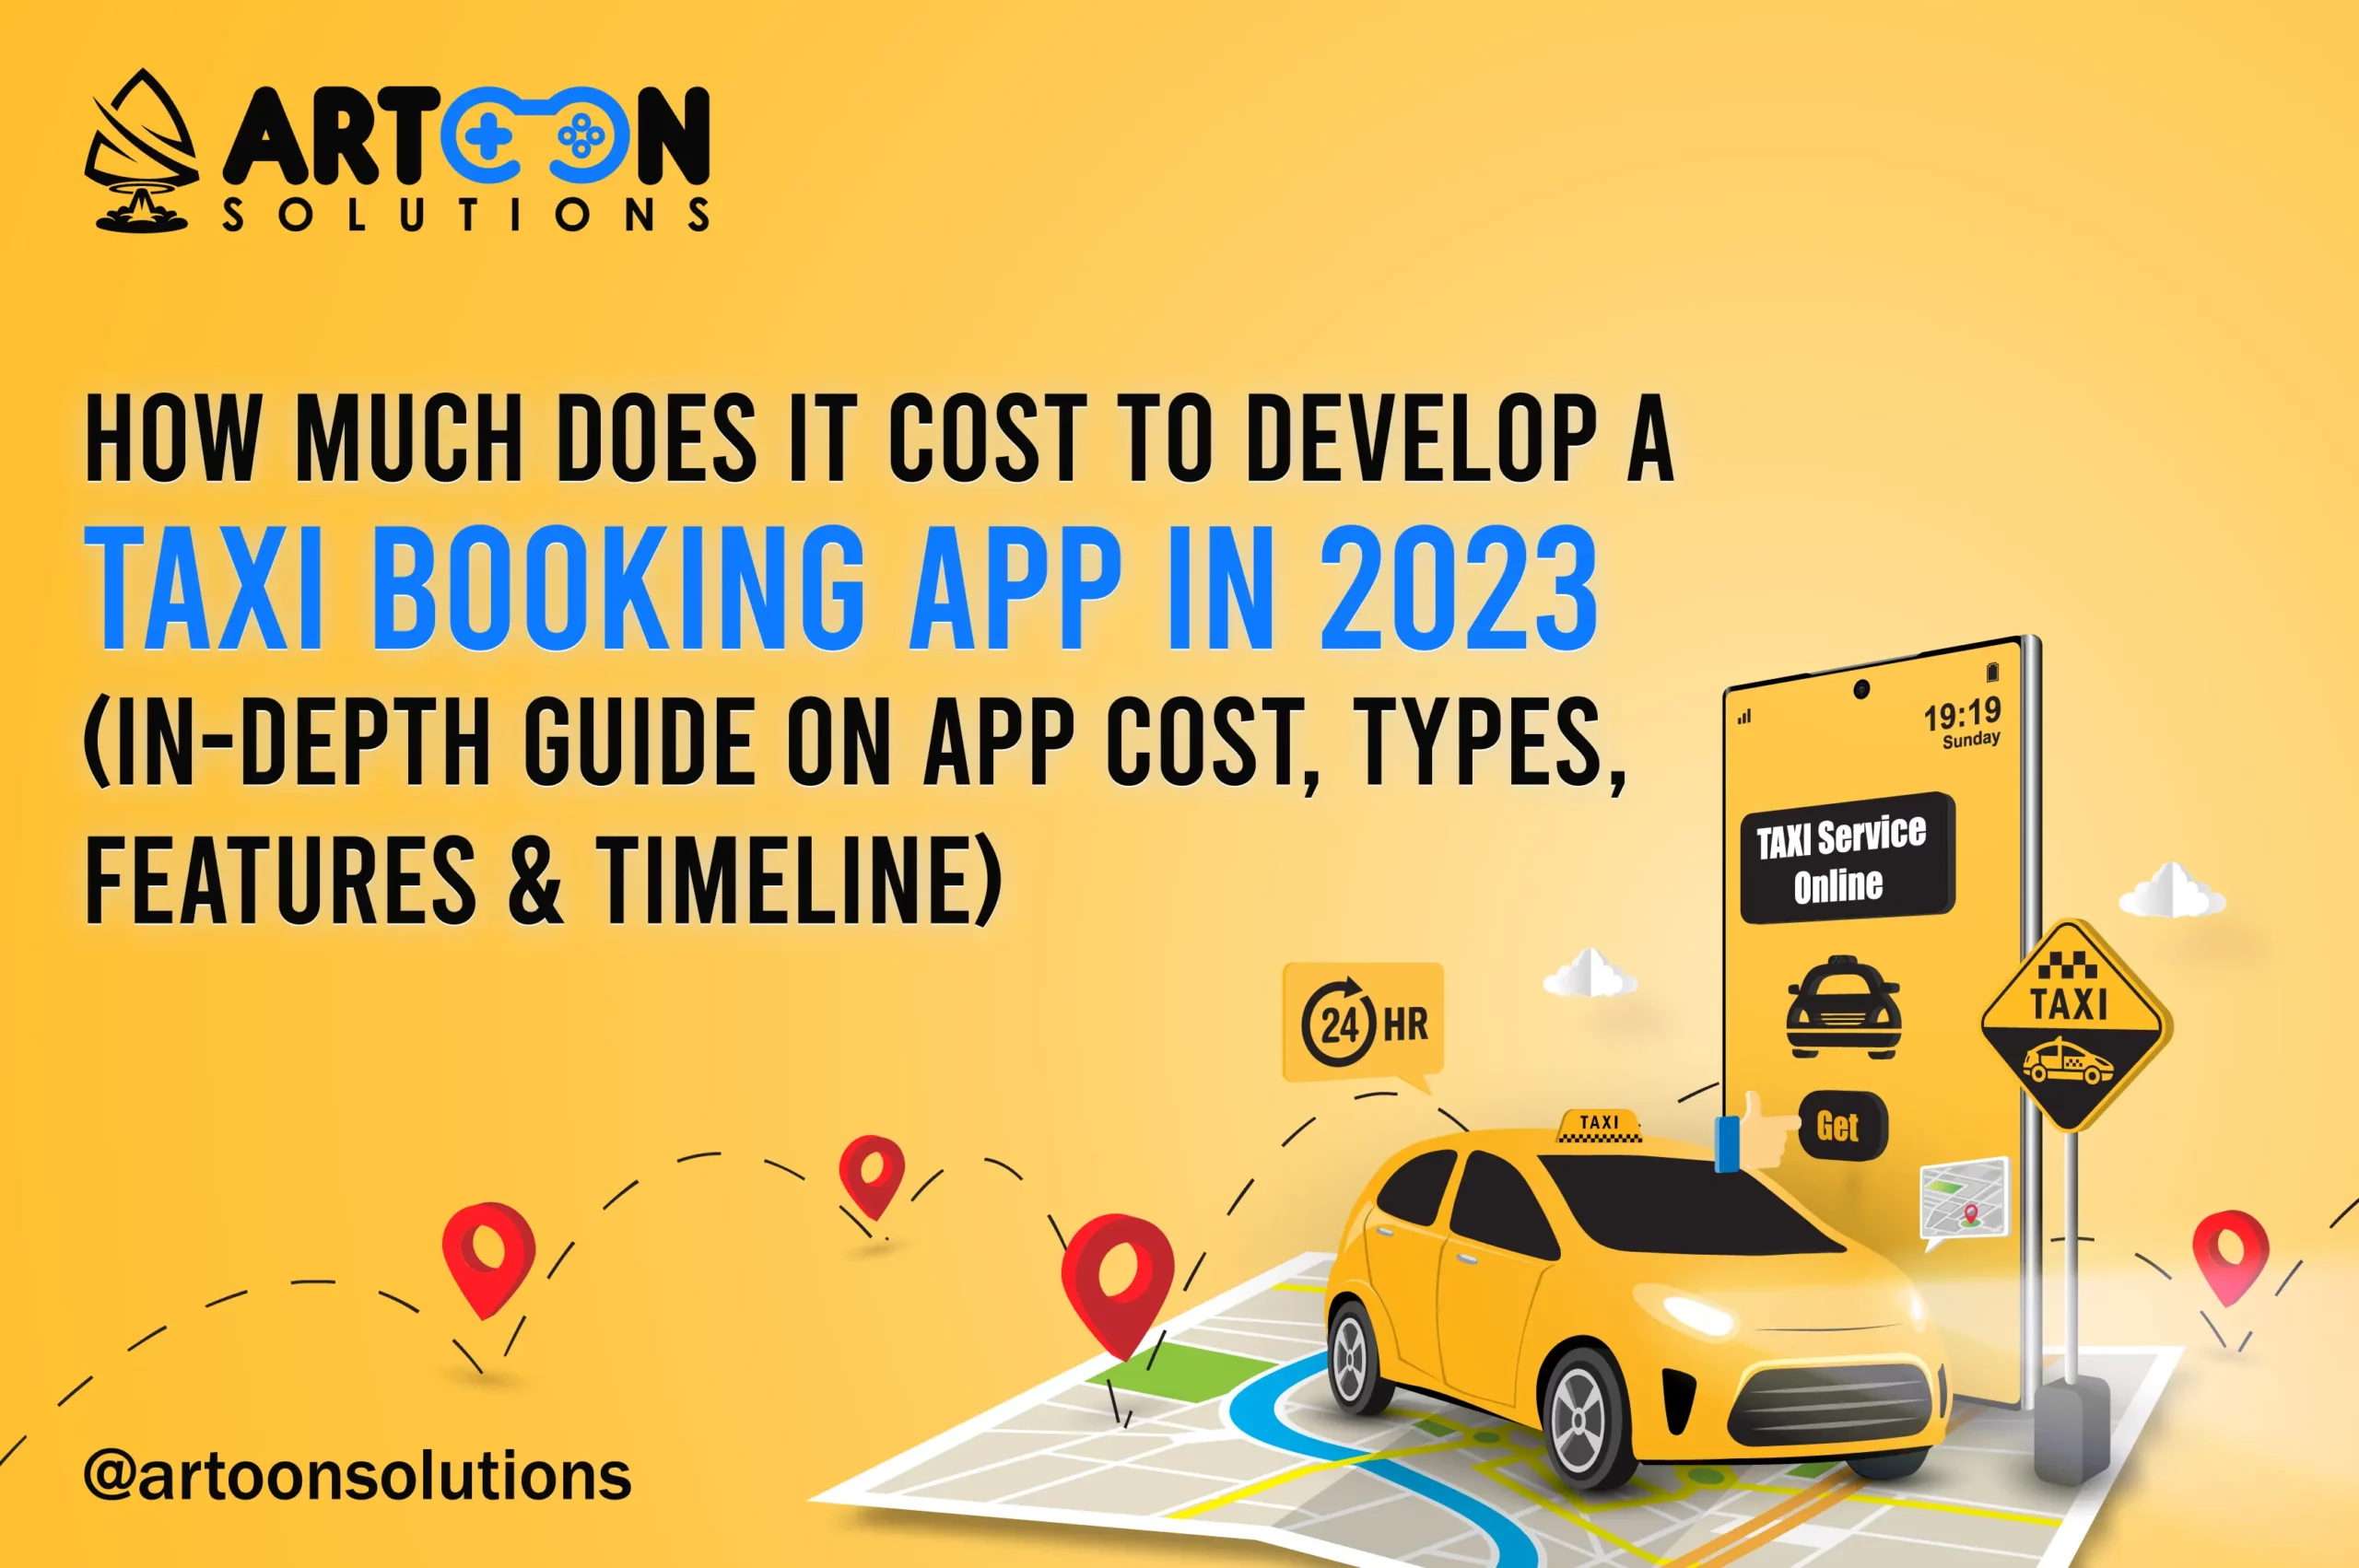 Develop a Taxi Booking App